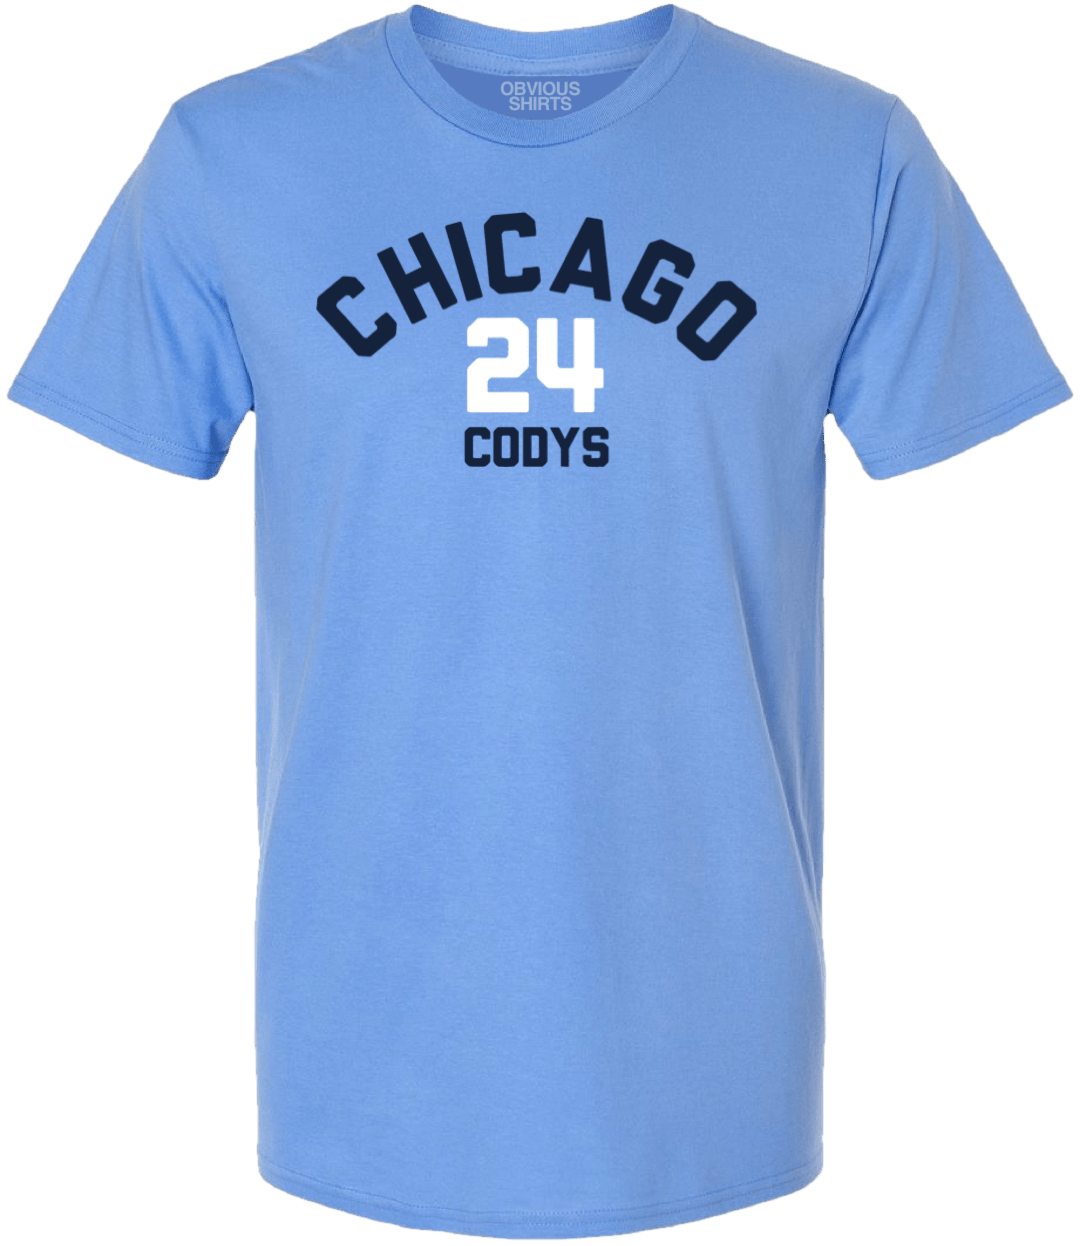 THE CHICAGO CODYS. - OBVIOUS SHIRTS